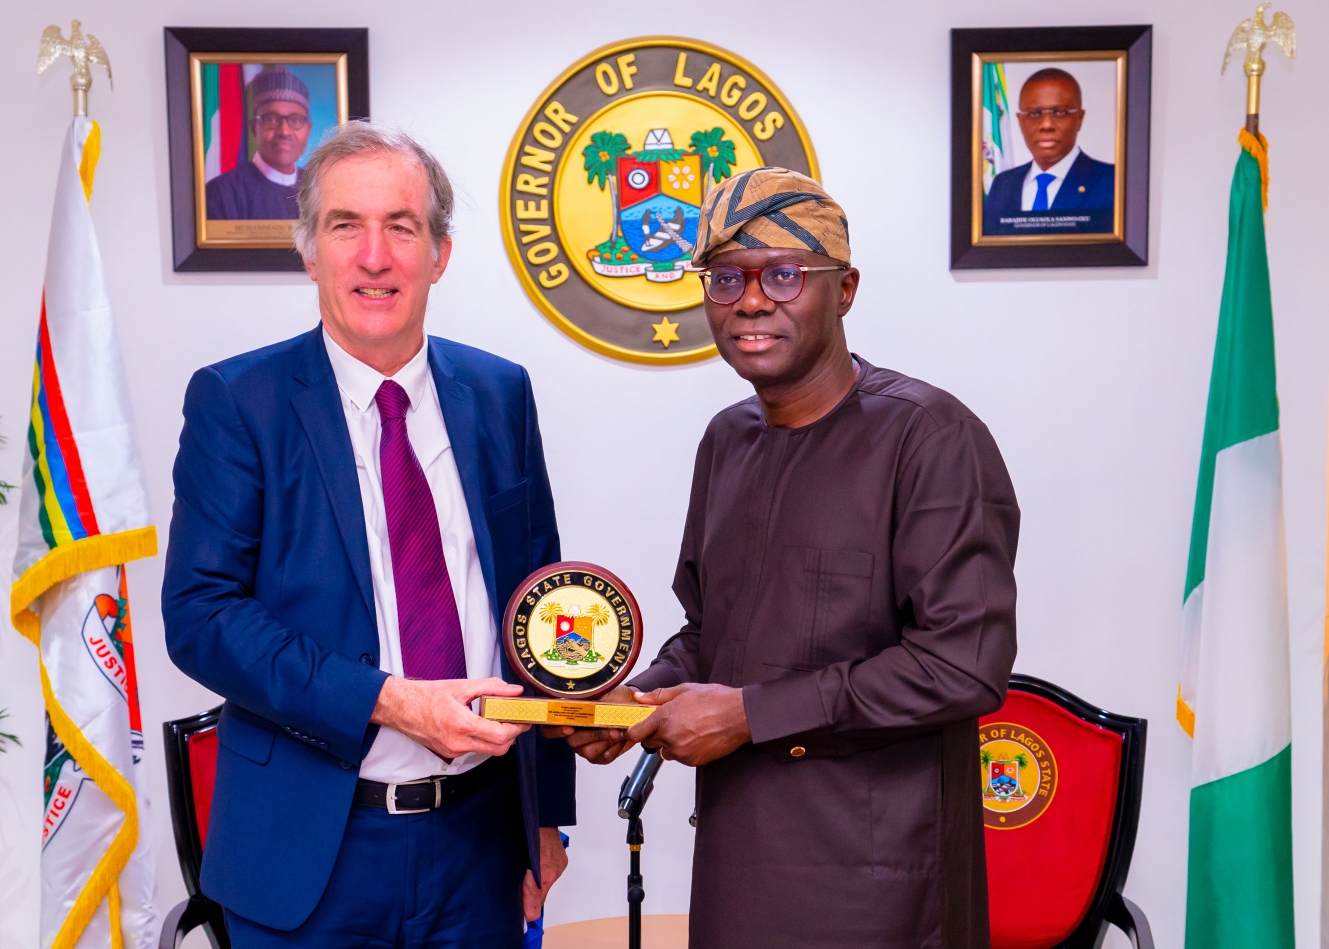 DIRECTOR OF AFRICA AND INDIAN OCEAN PAYS COURTESY VISIT TO GOVERNOR SANWO-OLU AT LAGOS HOUSE